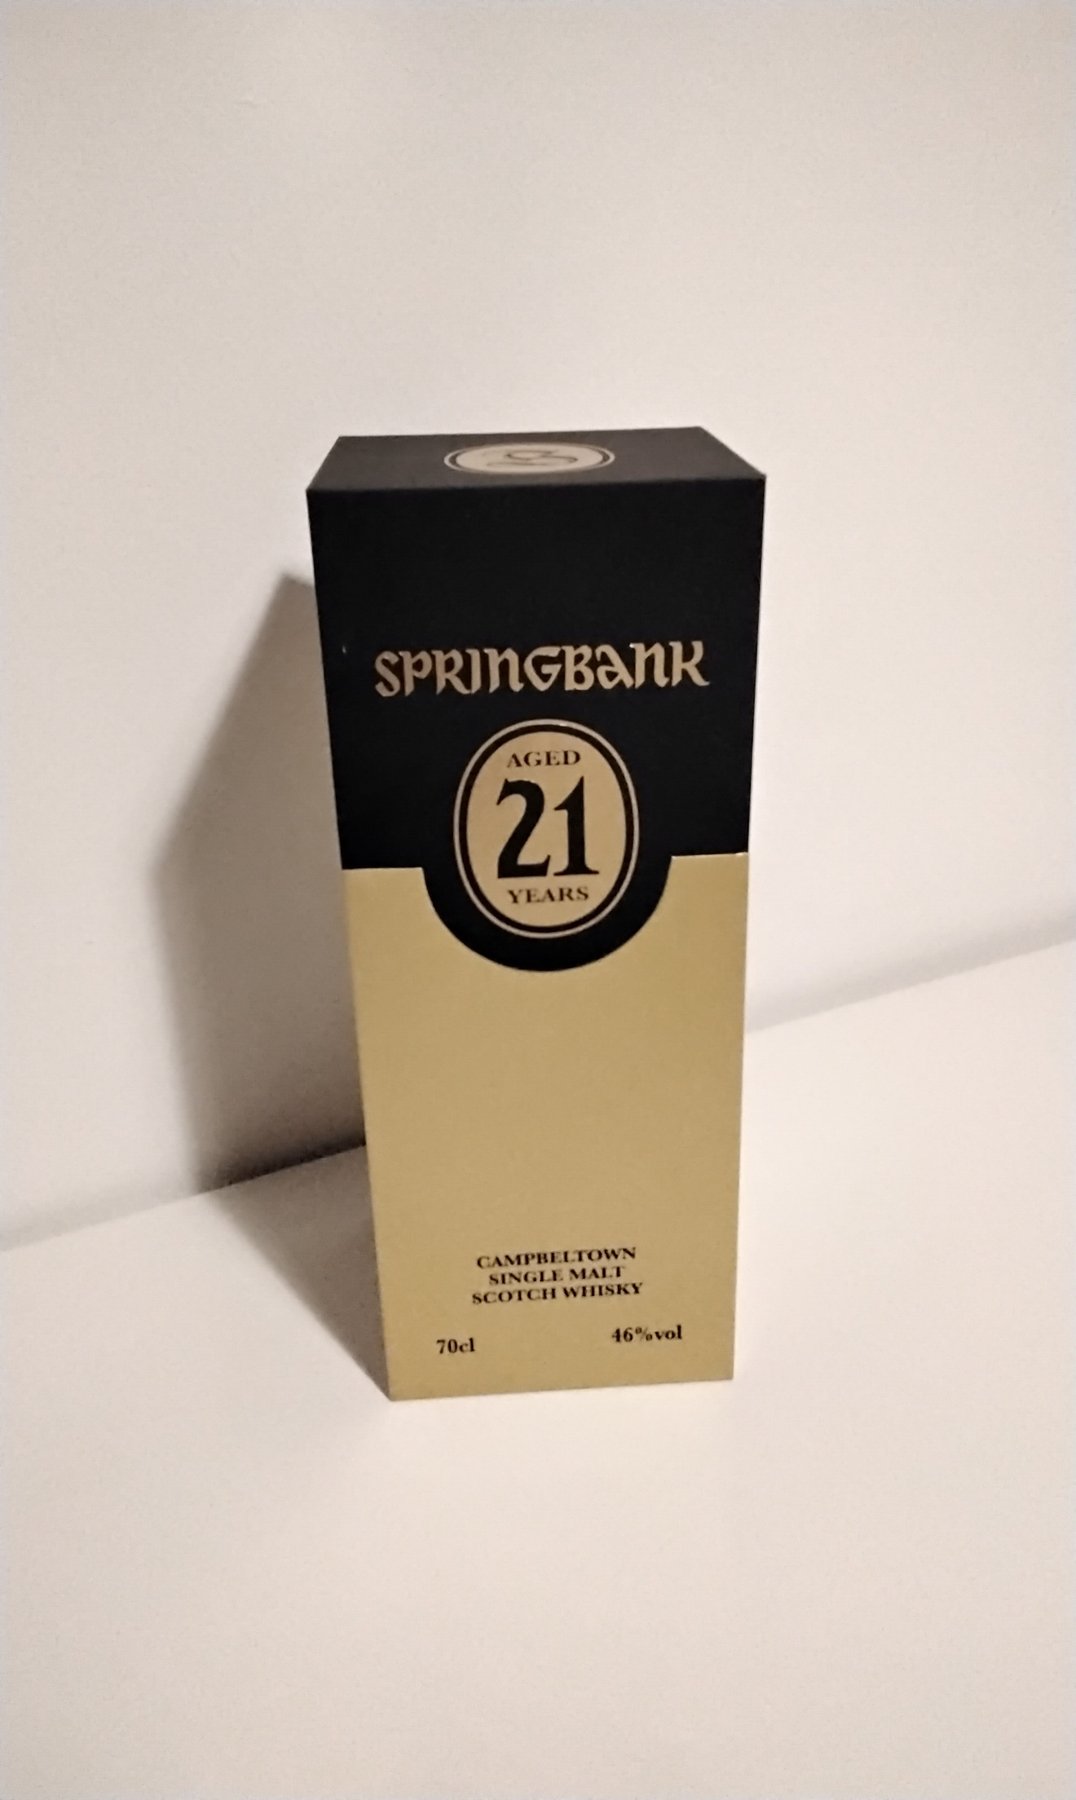 Springbank 21 years old Limited Edition - Original bottling - Catawiki